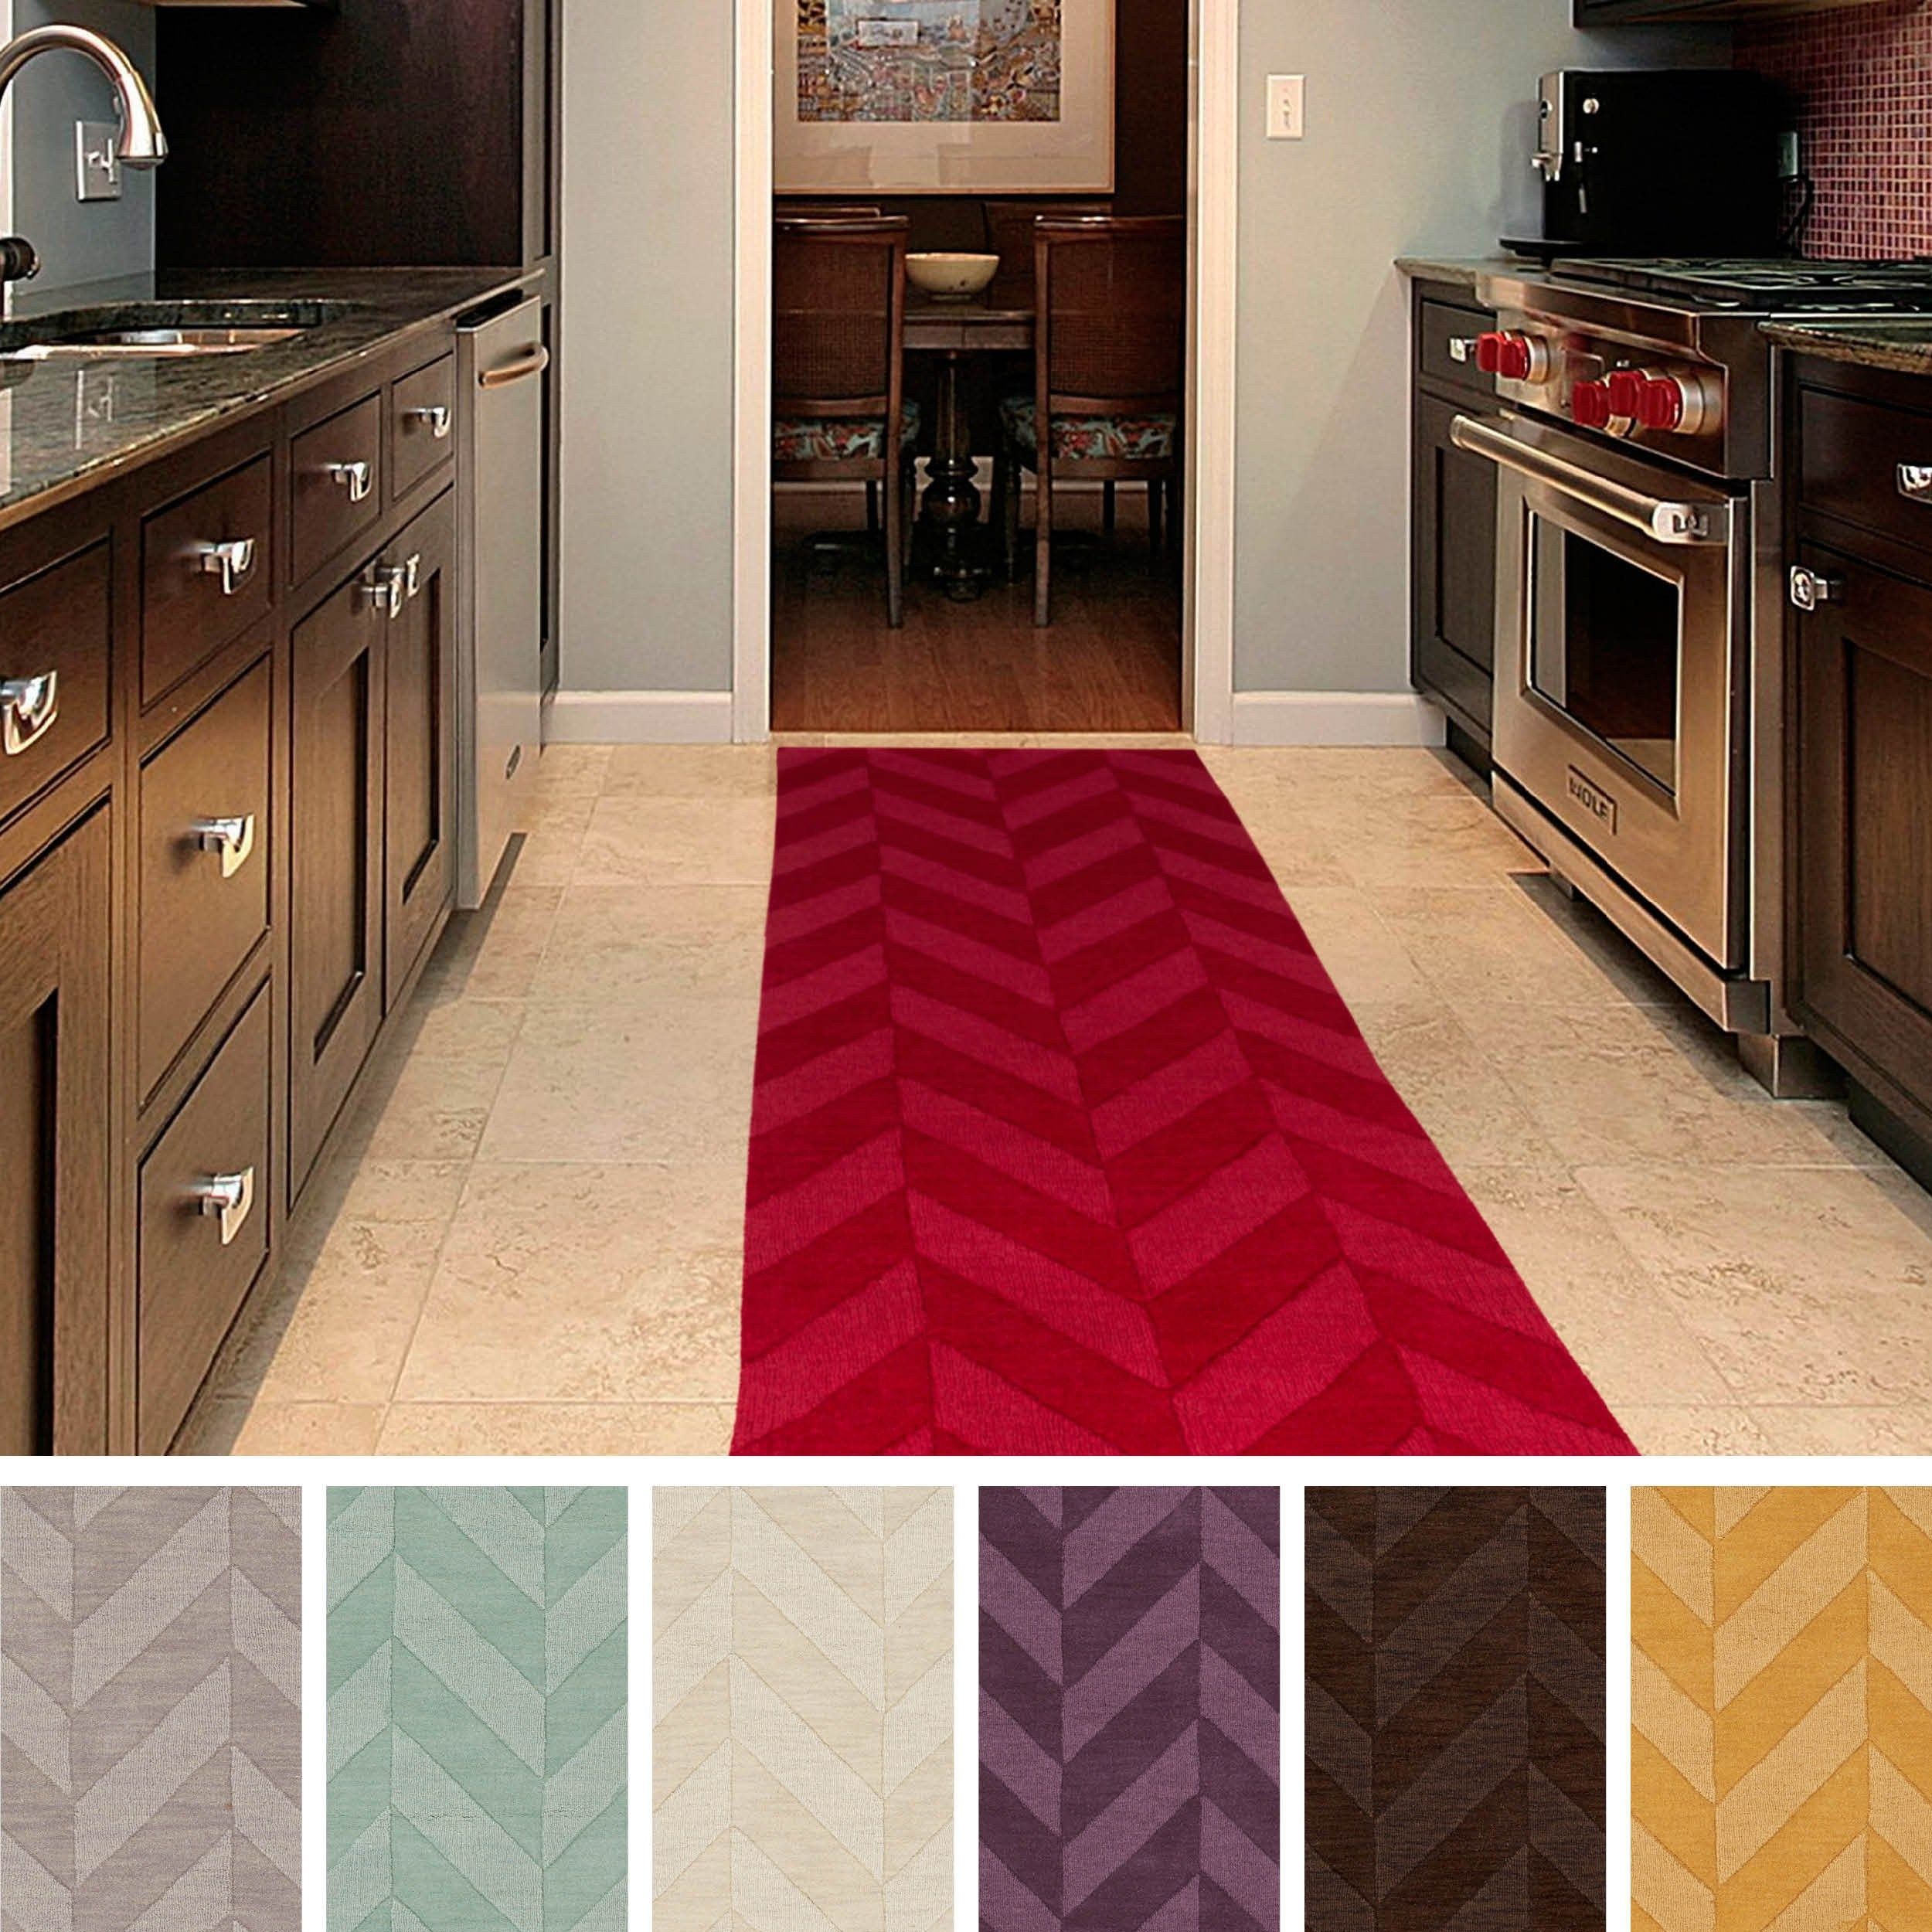 Kitchen Runner Rugs Source Kitchen Rug Runner Red Kilim Rugs Pertaining To Hallway Runners And Rugs (View 20 of 20)